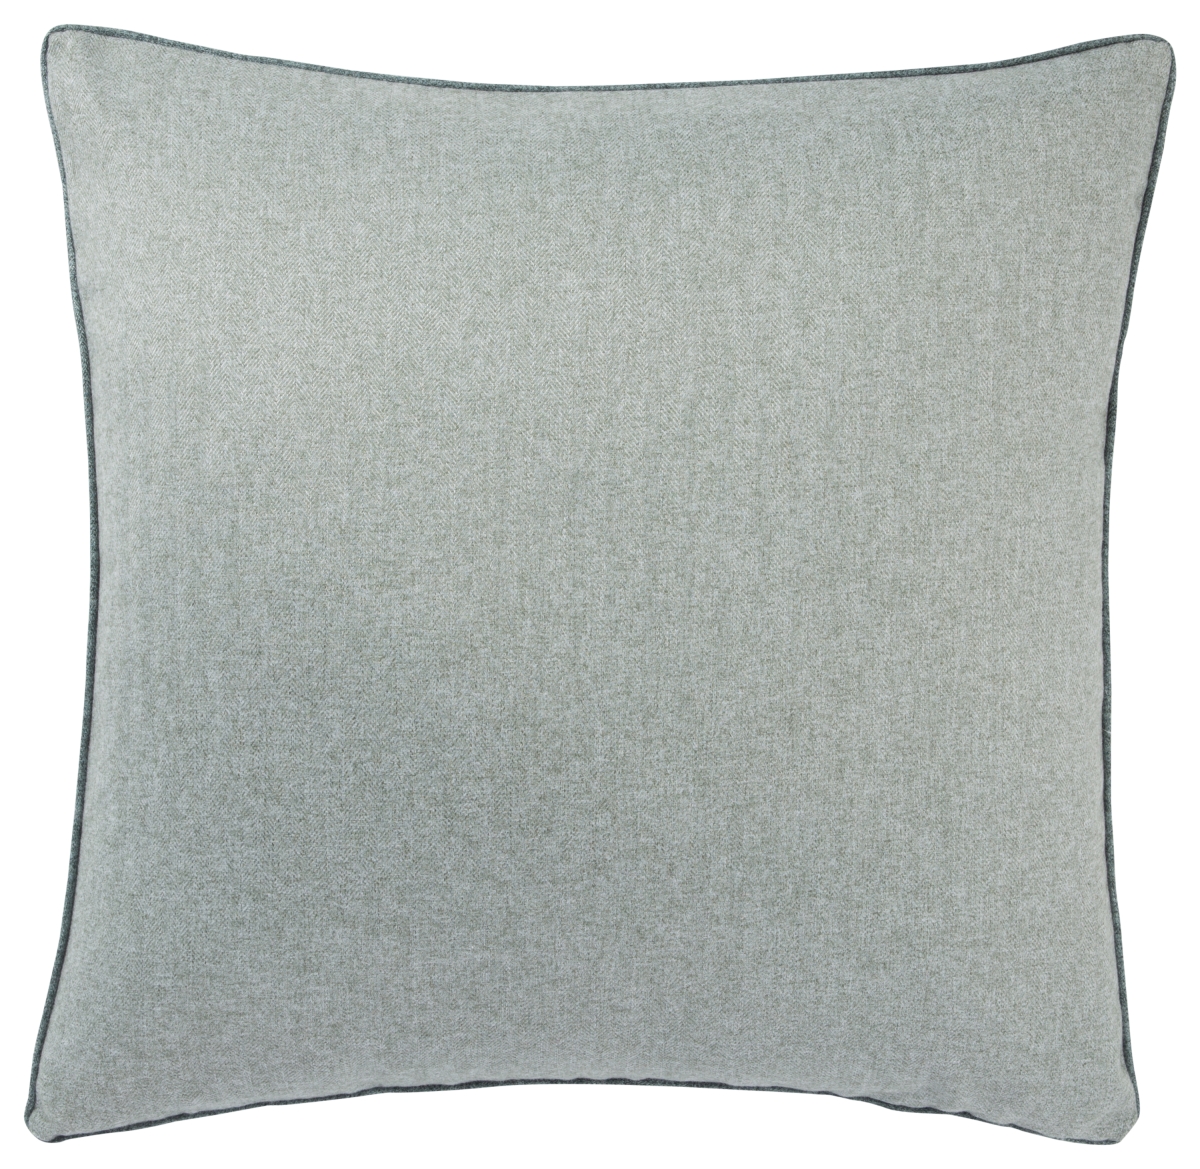 Plw103290 22 X 22 In. Pilcro Rollins Solid Light Blue Poly Throw Pillow